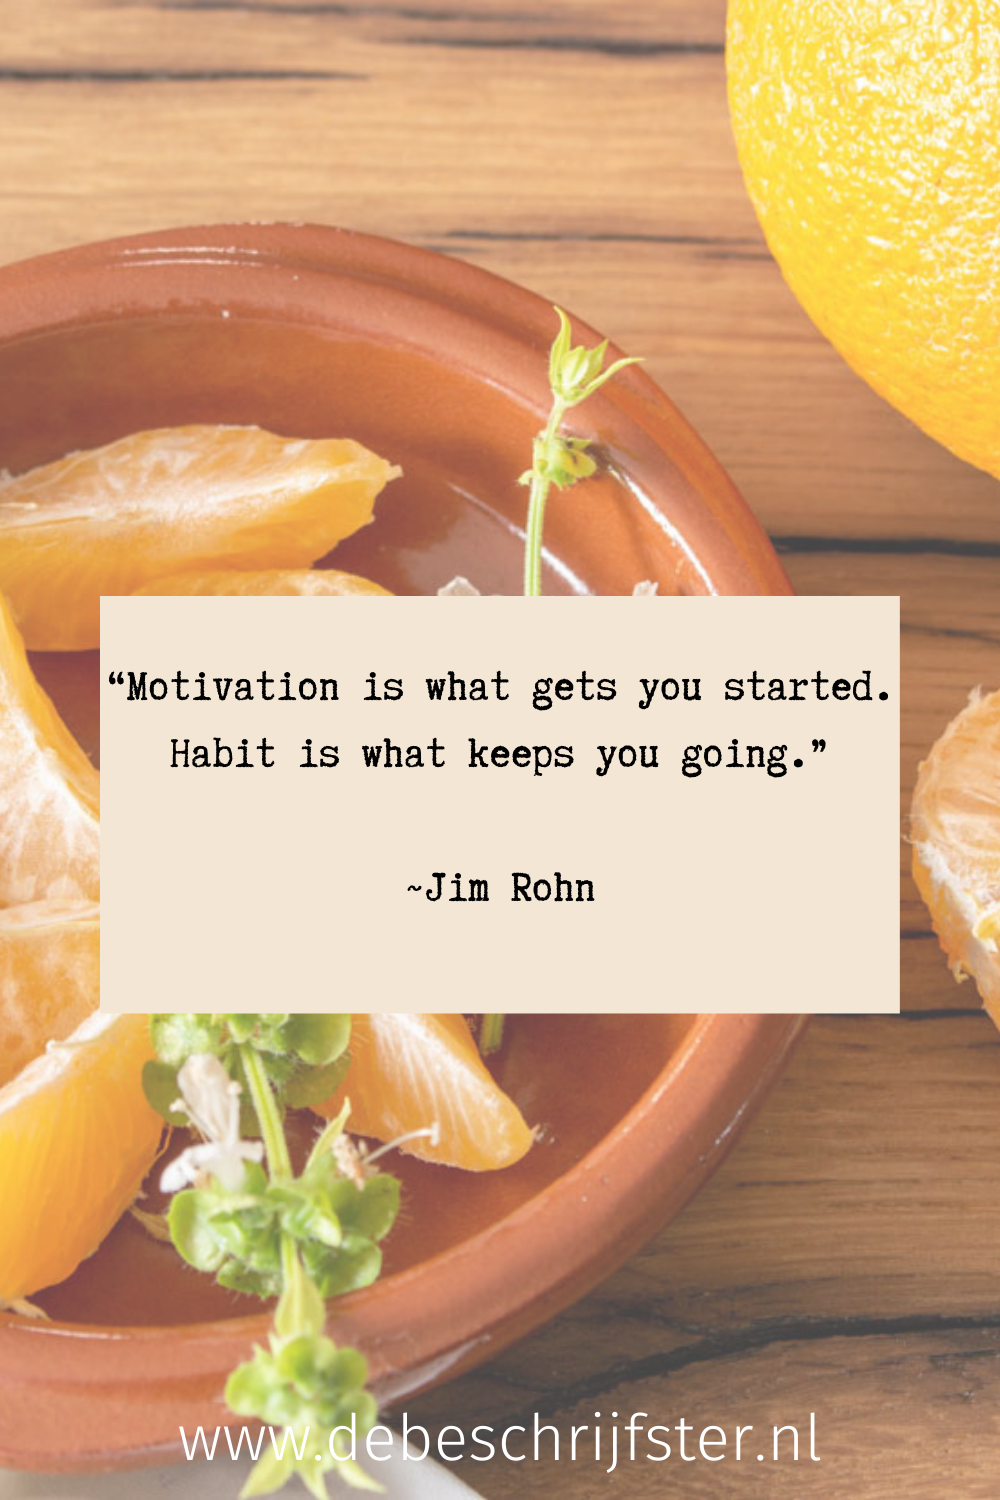 ‘Motivation is what gets you started. Habit is what keeps you going.’ Jim Rohn